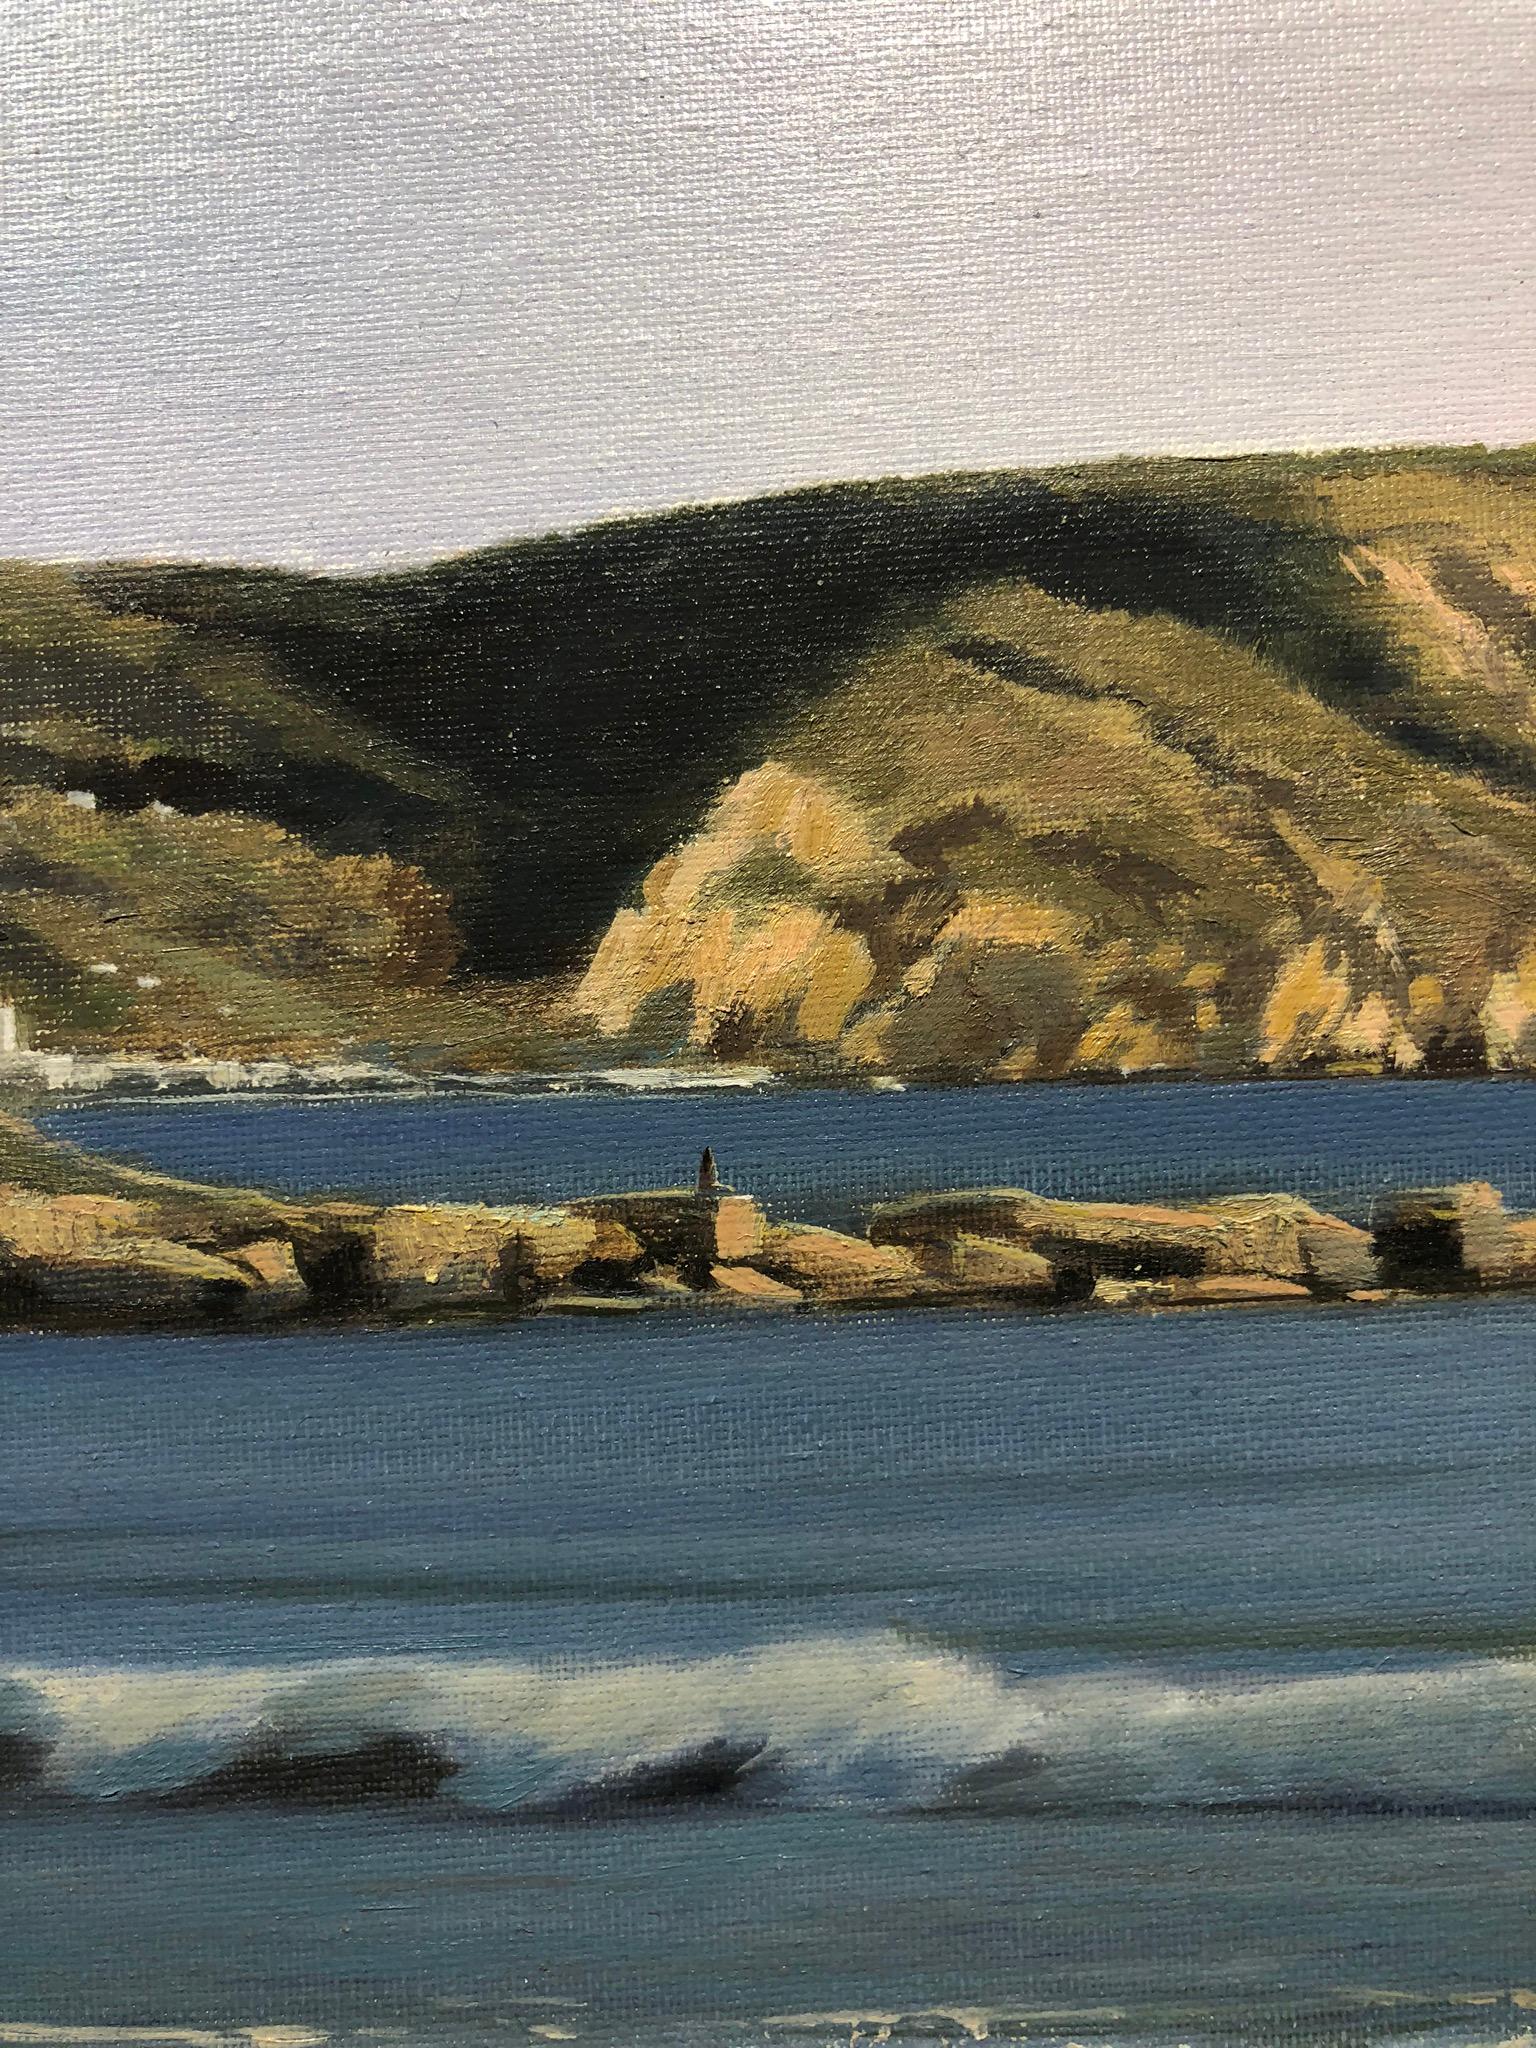 how to paint rocky cliffs